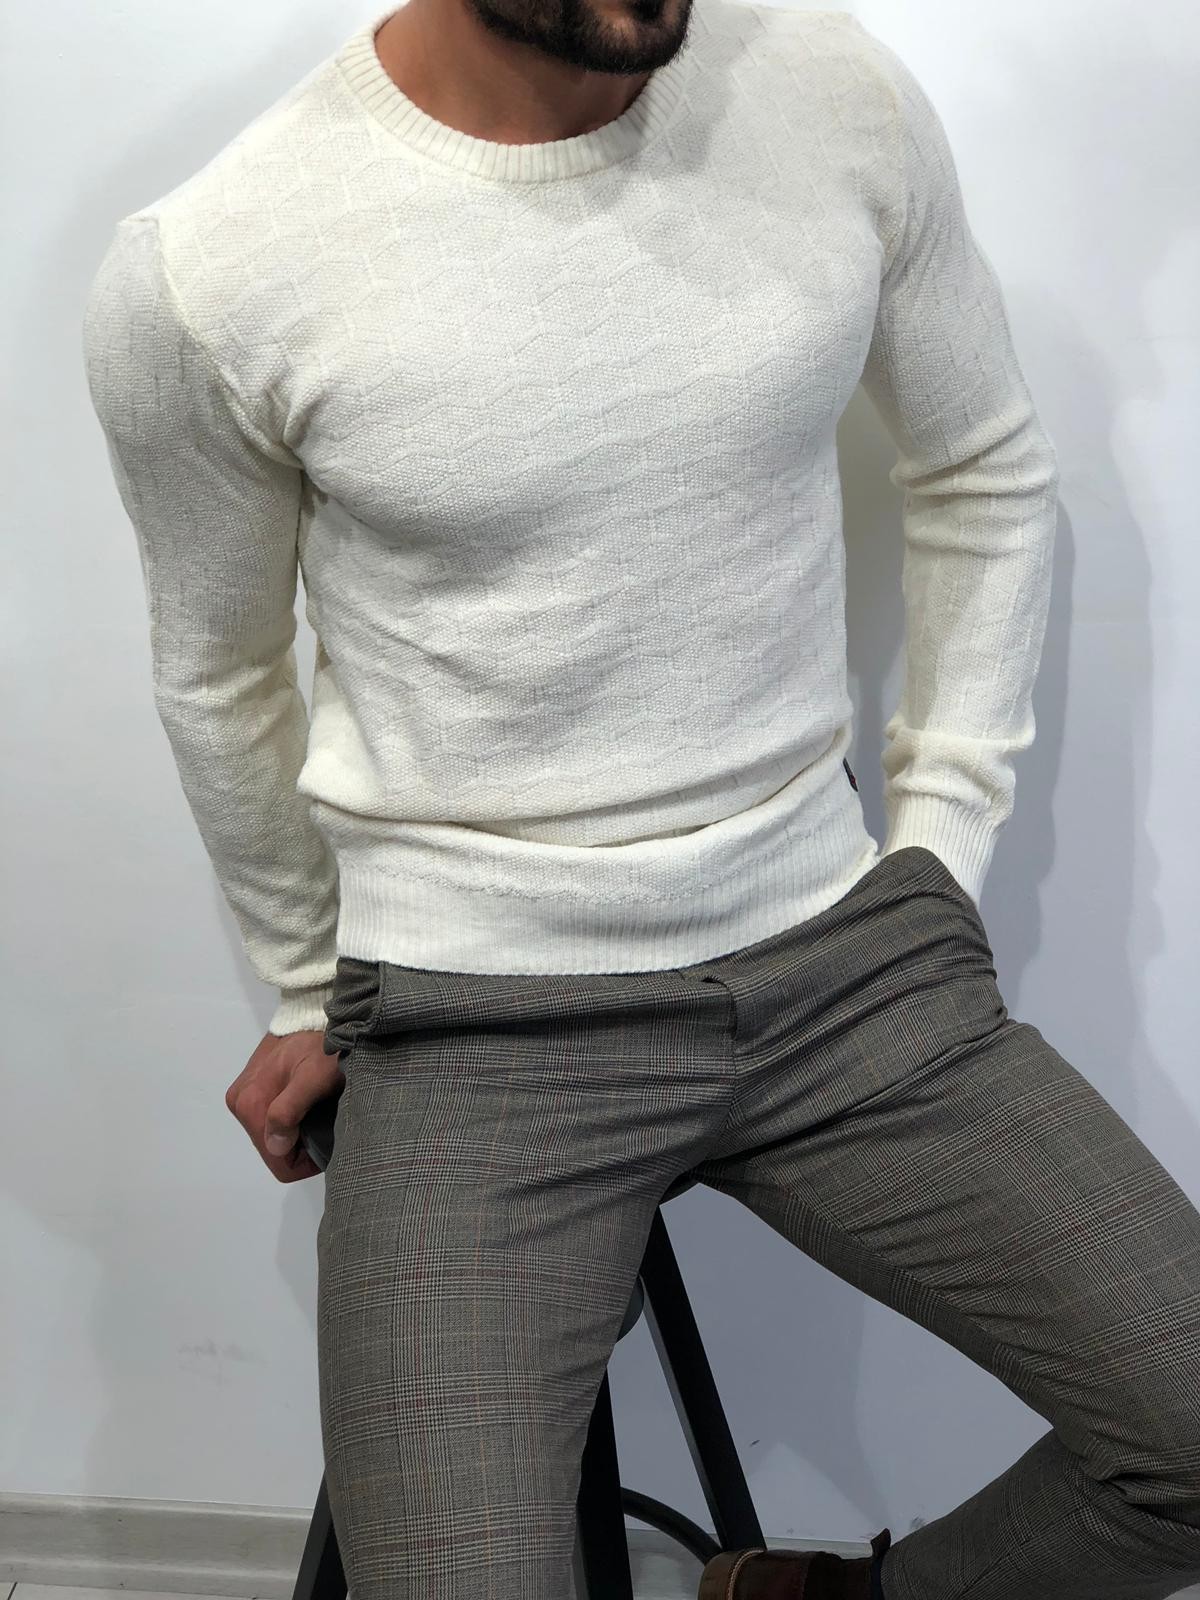 Buy Ecru Slim Fit Sweater by Gentwith.com with Free Shipping